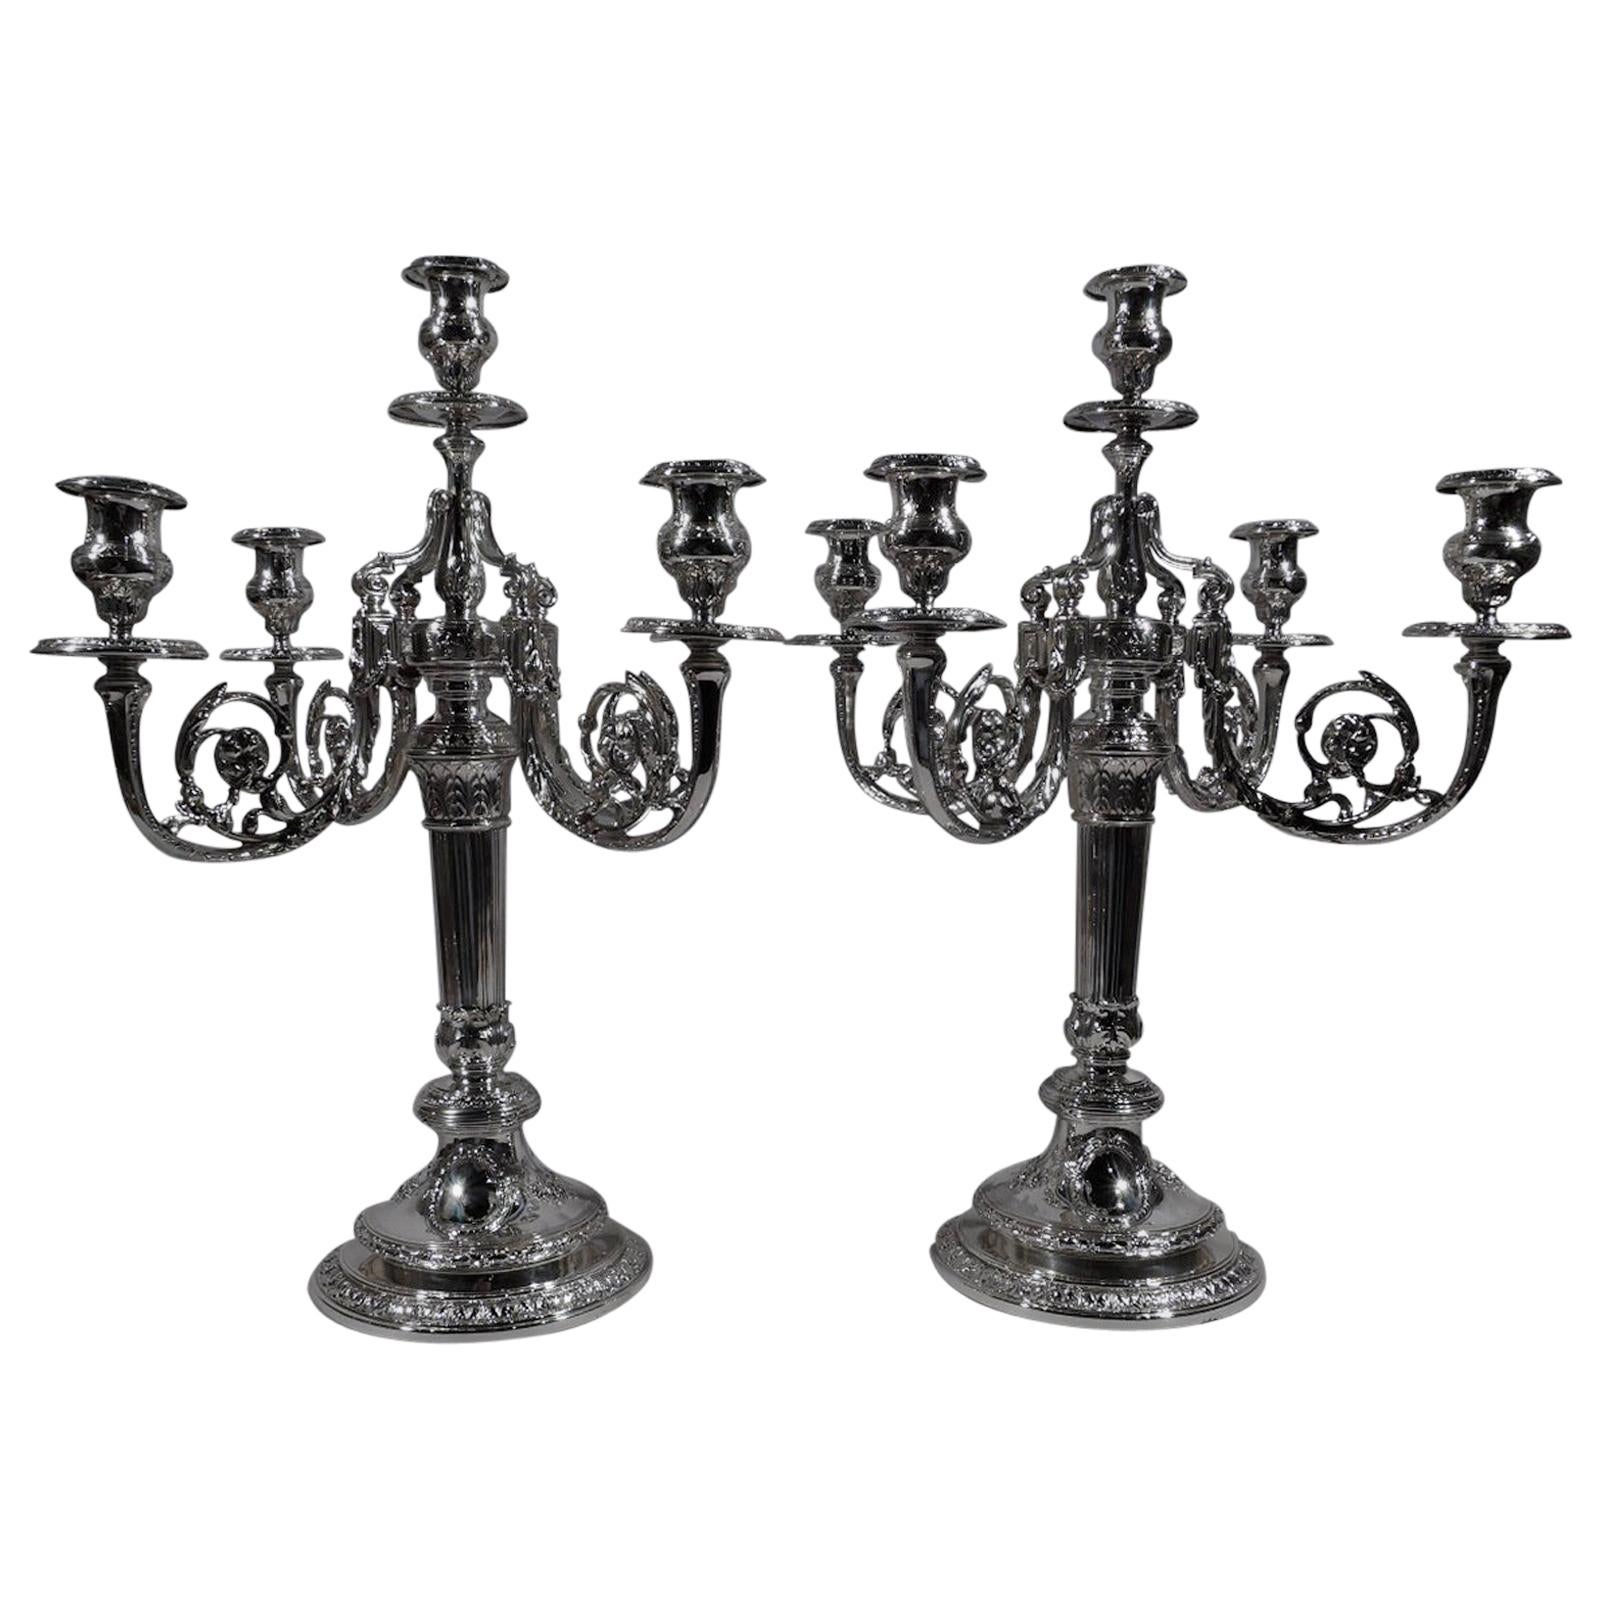 Pair of Large Antique Gorham French Neoclassical 5-Light Candelabra